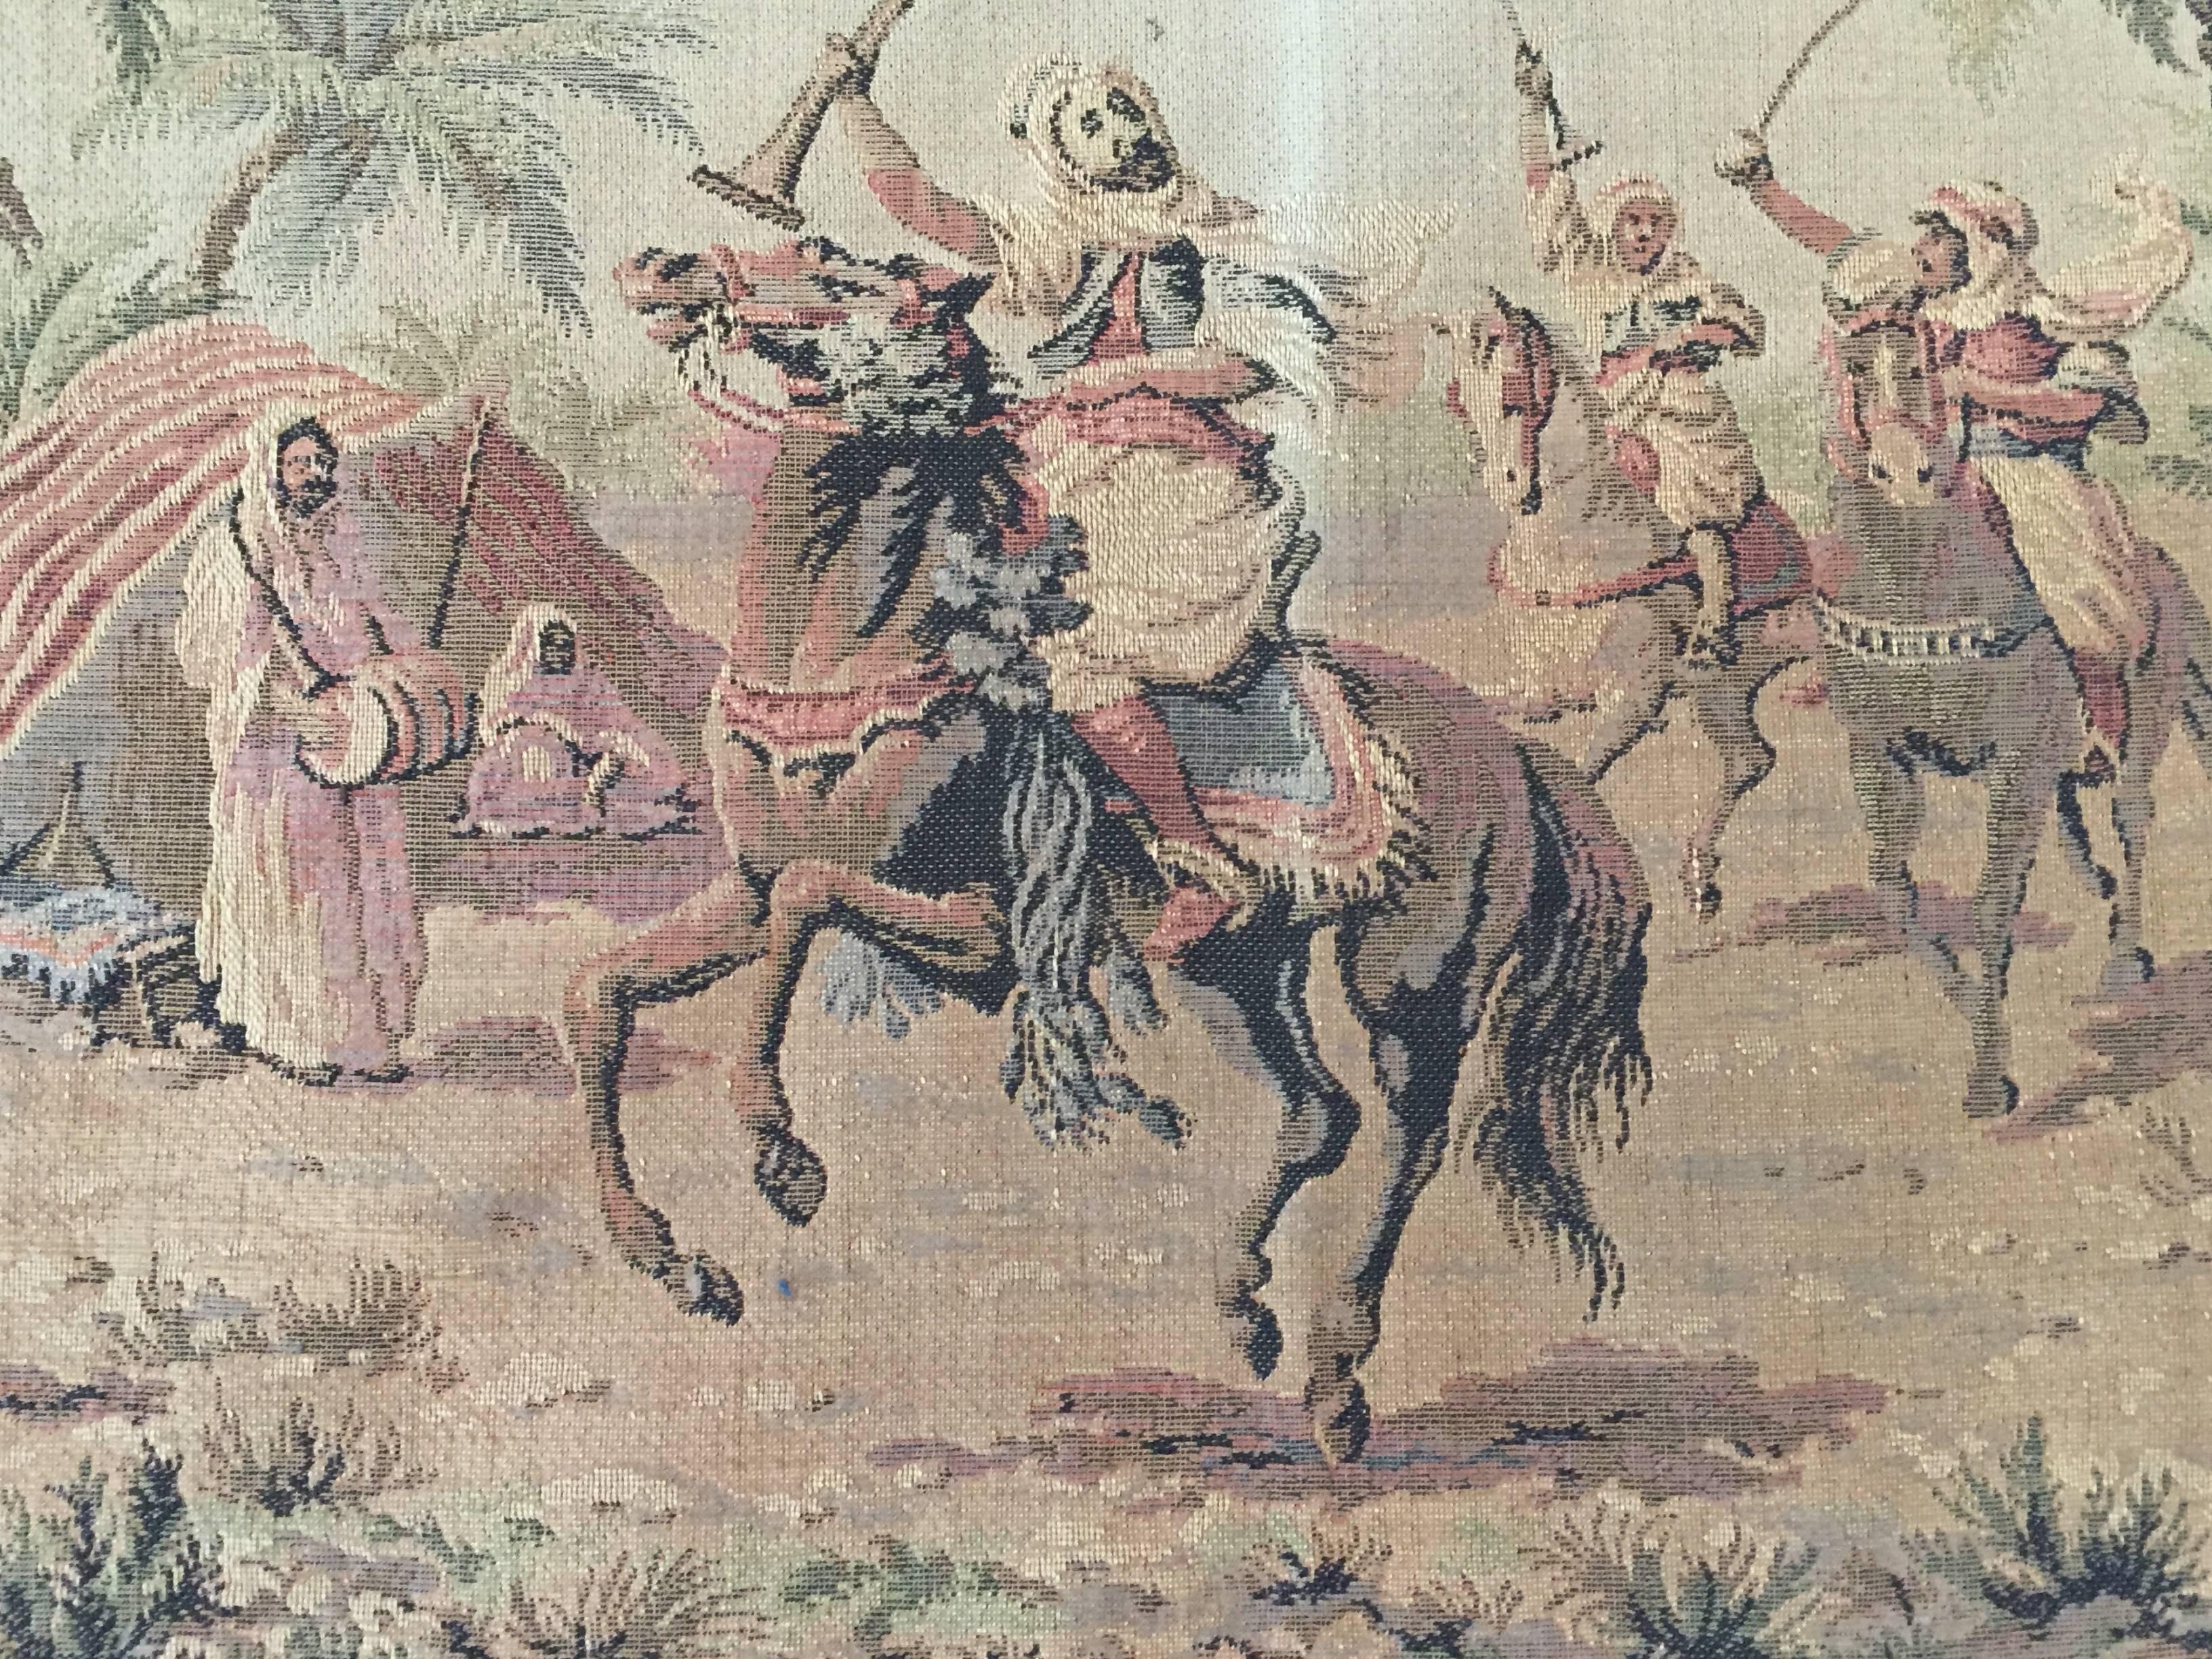 Wool tapestry with orientalist Arab on horse hunting scene, brown antique look colors.
Textile with Berber Nomadic tent in the background and Middle Eastern musicians.
Aubusson tapestry style, circa 1940 made in France stamped in the